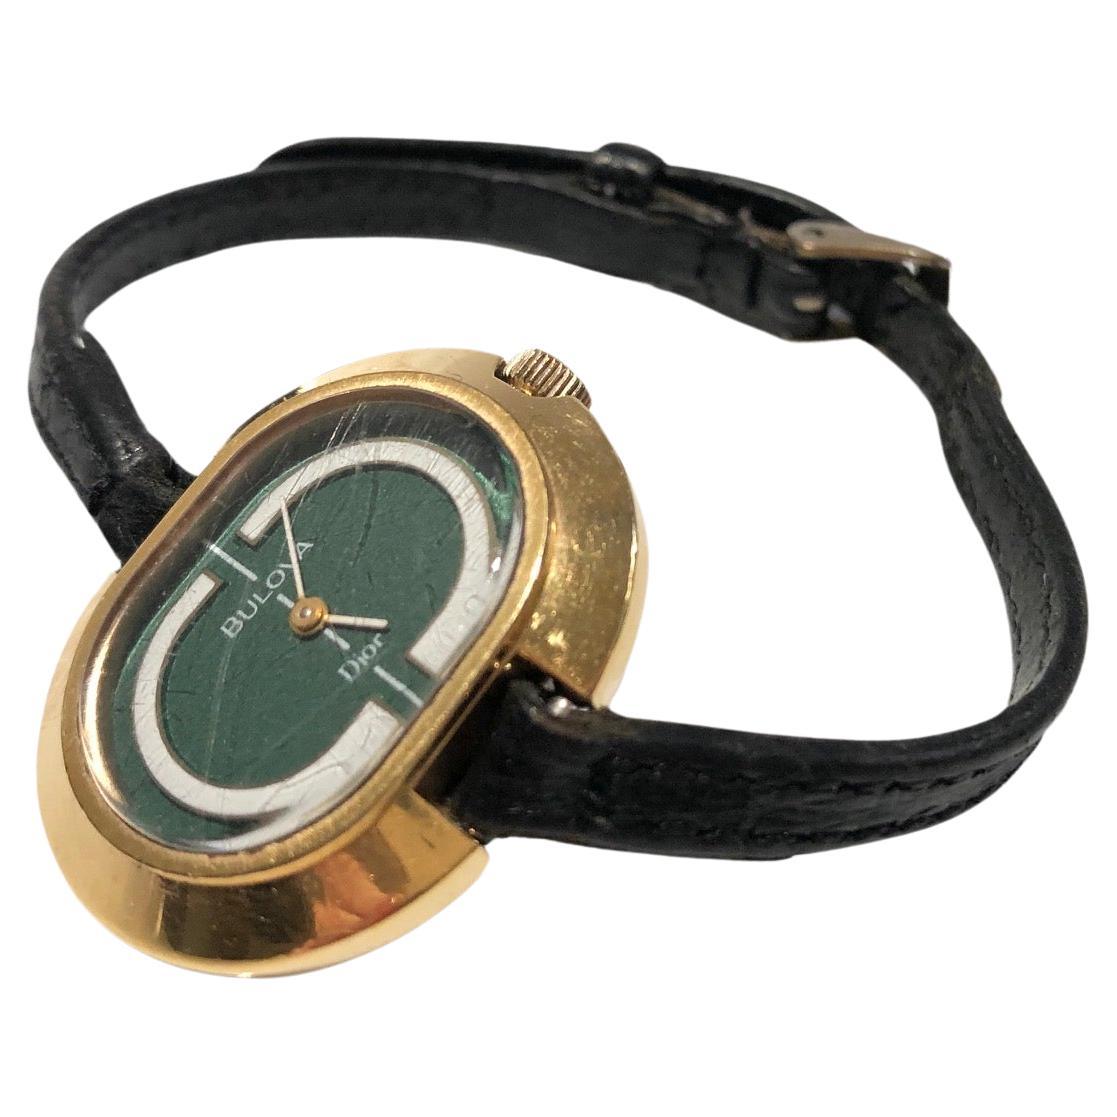 14K gold plated Dior by Bulova wrist wind up watch, fully working, green and white face, original black leather strap

Condition: Early 1970s, gold metal ware is in very good condition, watch face has some light scratches but no cracks, original